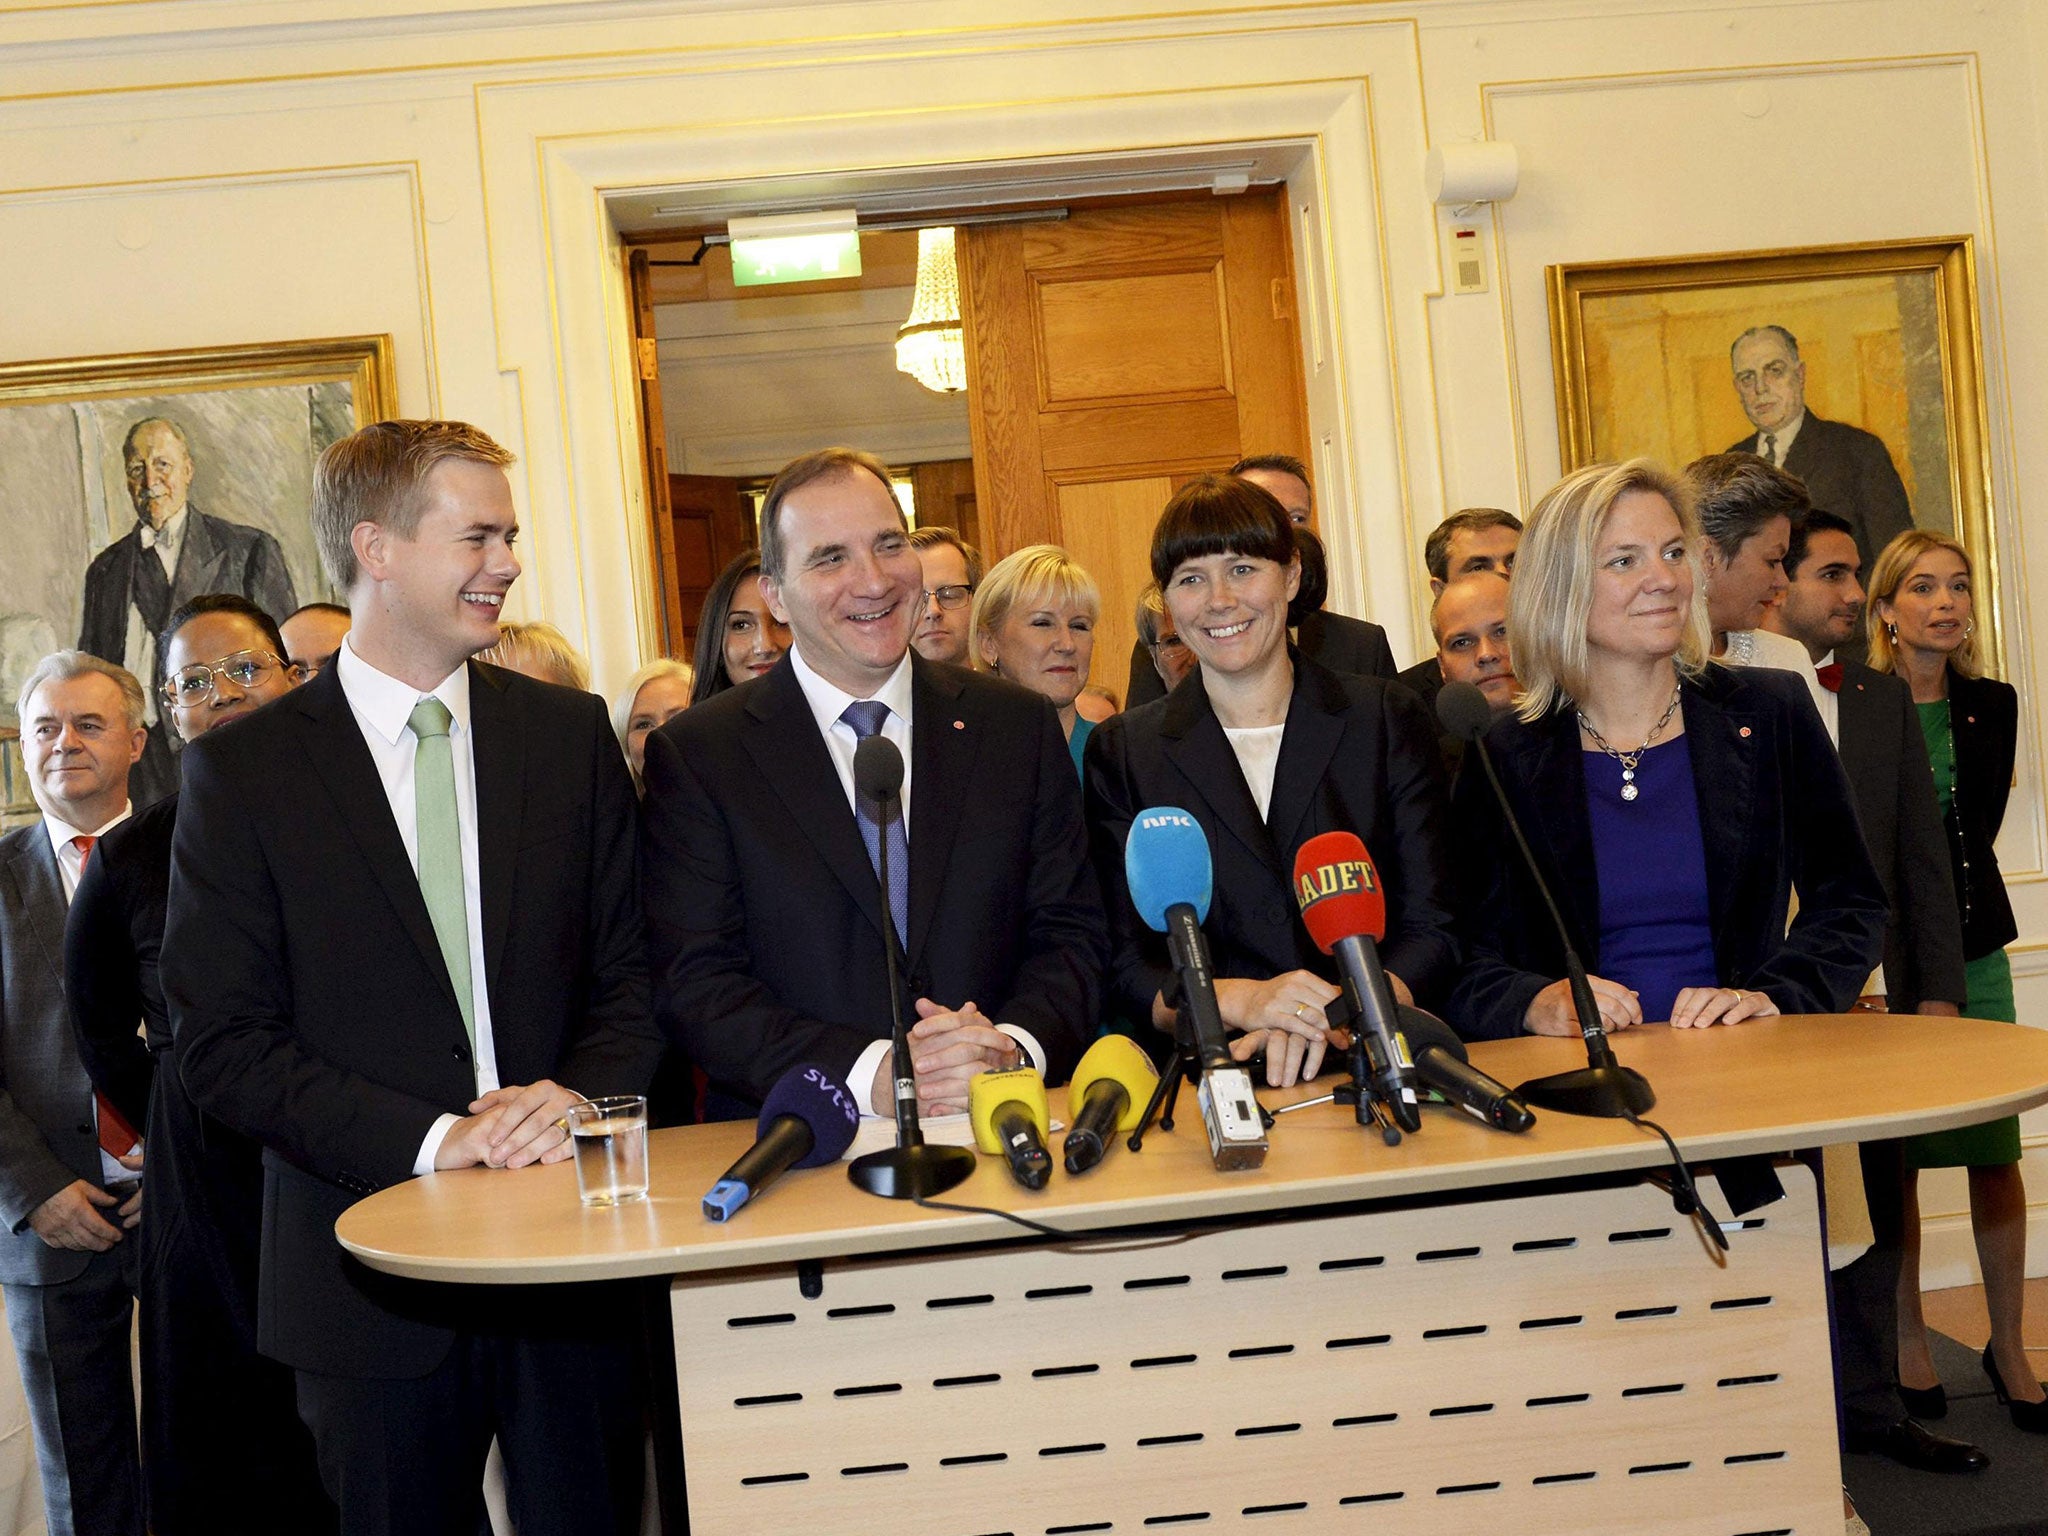 Swedish Prime Minister Stefan Lofven (front 2nd L) smiles as he stands with his new government